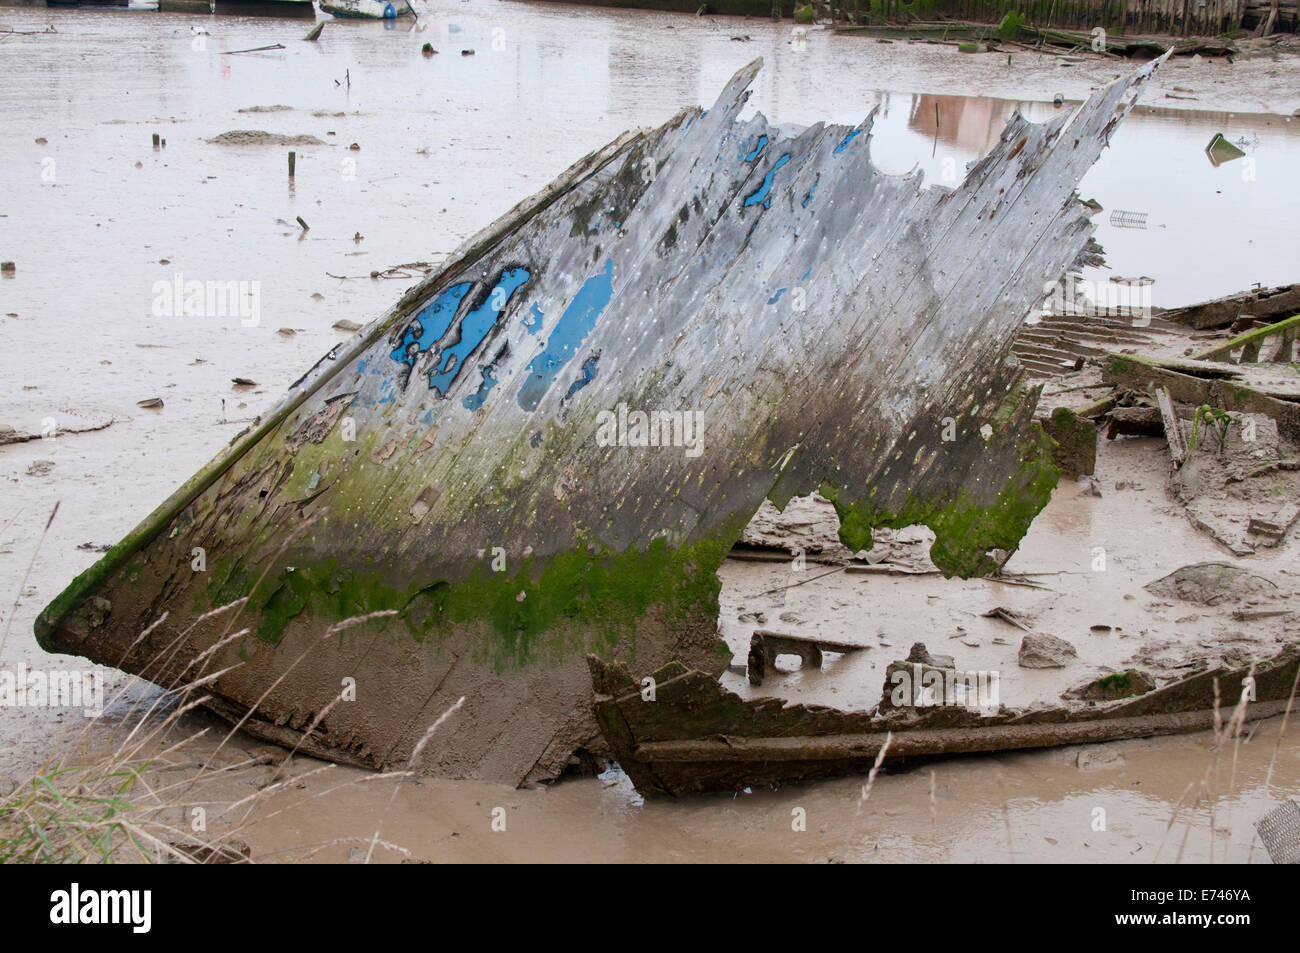 Shot of an old wooden boat, with peeling blue paint, that is decaying away Stock Photo